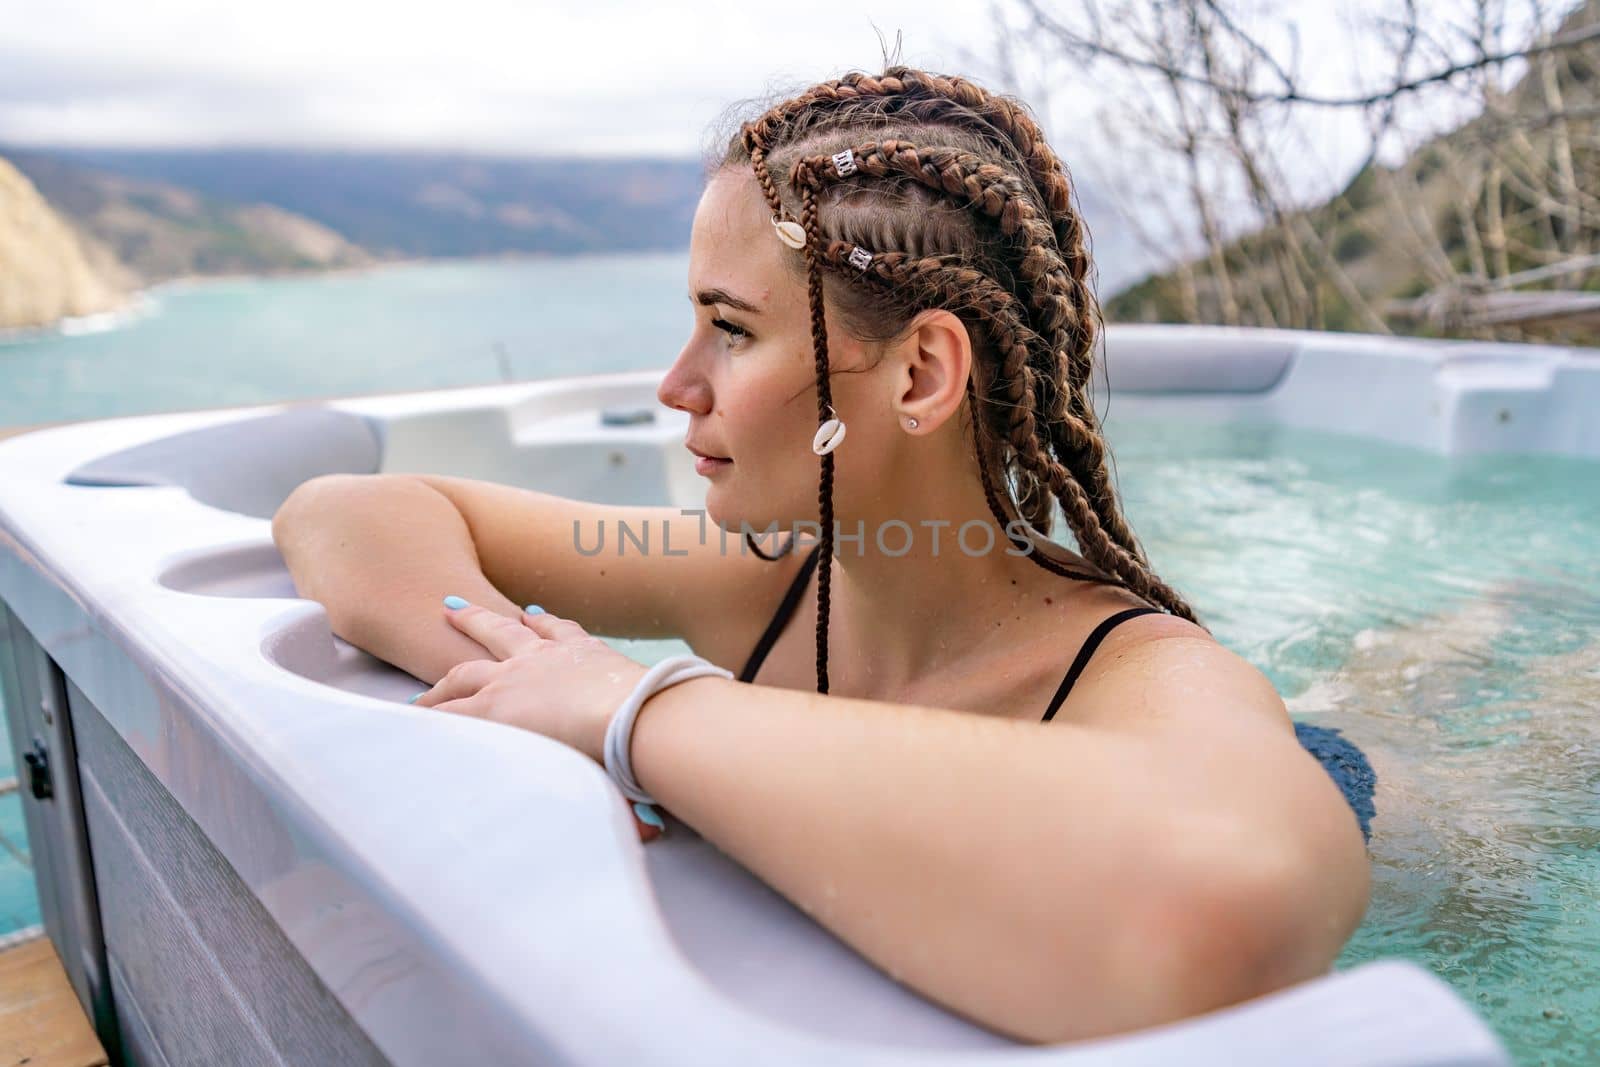 Take time for yourself. Outdoor swimsuit with mountain and sea views. A woman in a black swimsuit is relaxing in the hotel pool, admiring the view.